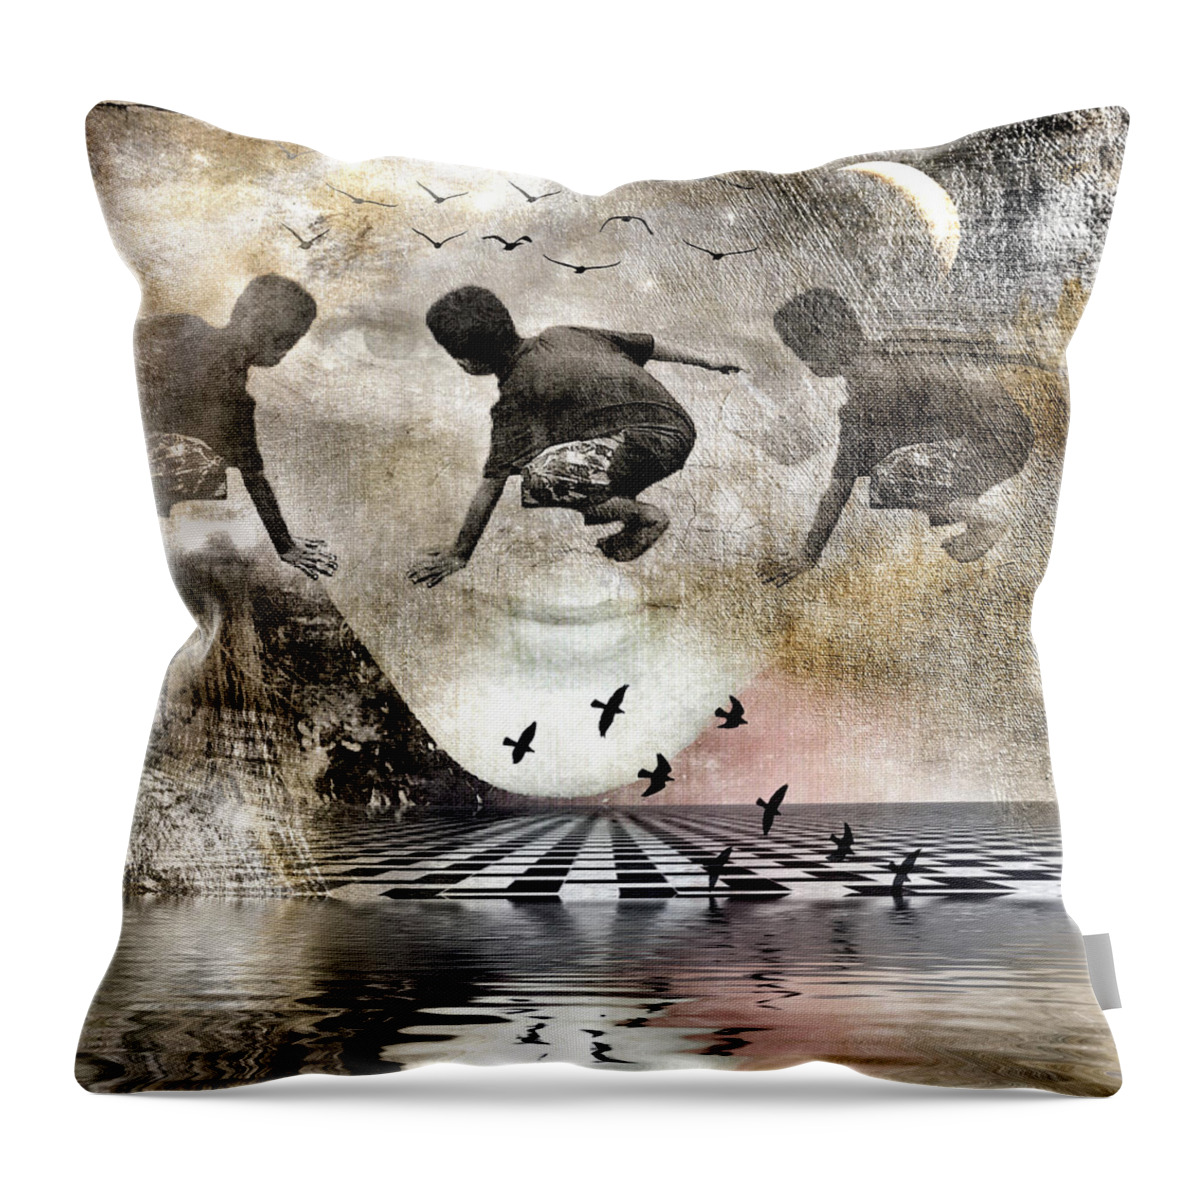 Imagination Throw Pillow featuring the digital art Lean On Me by Melissa D Johnston